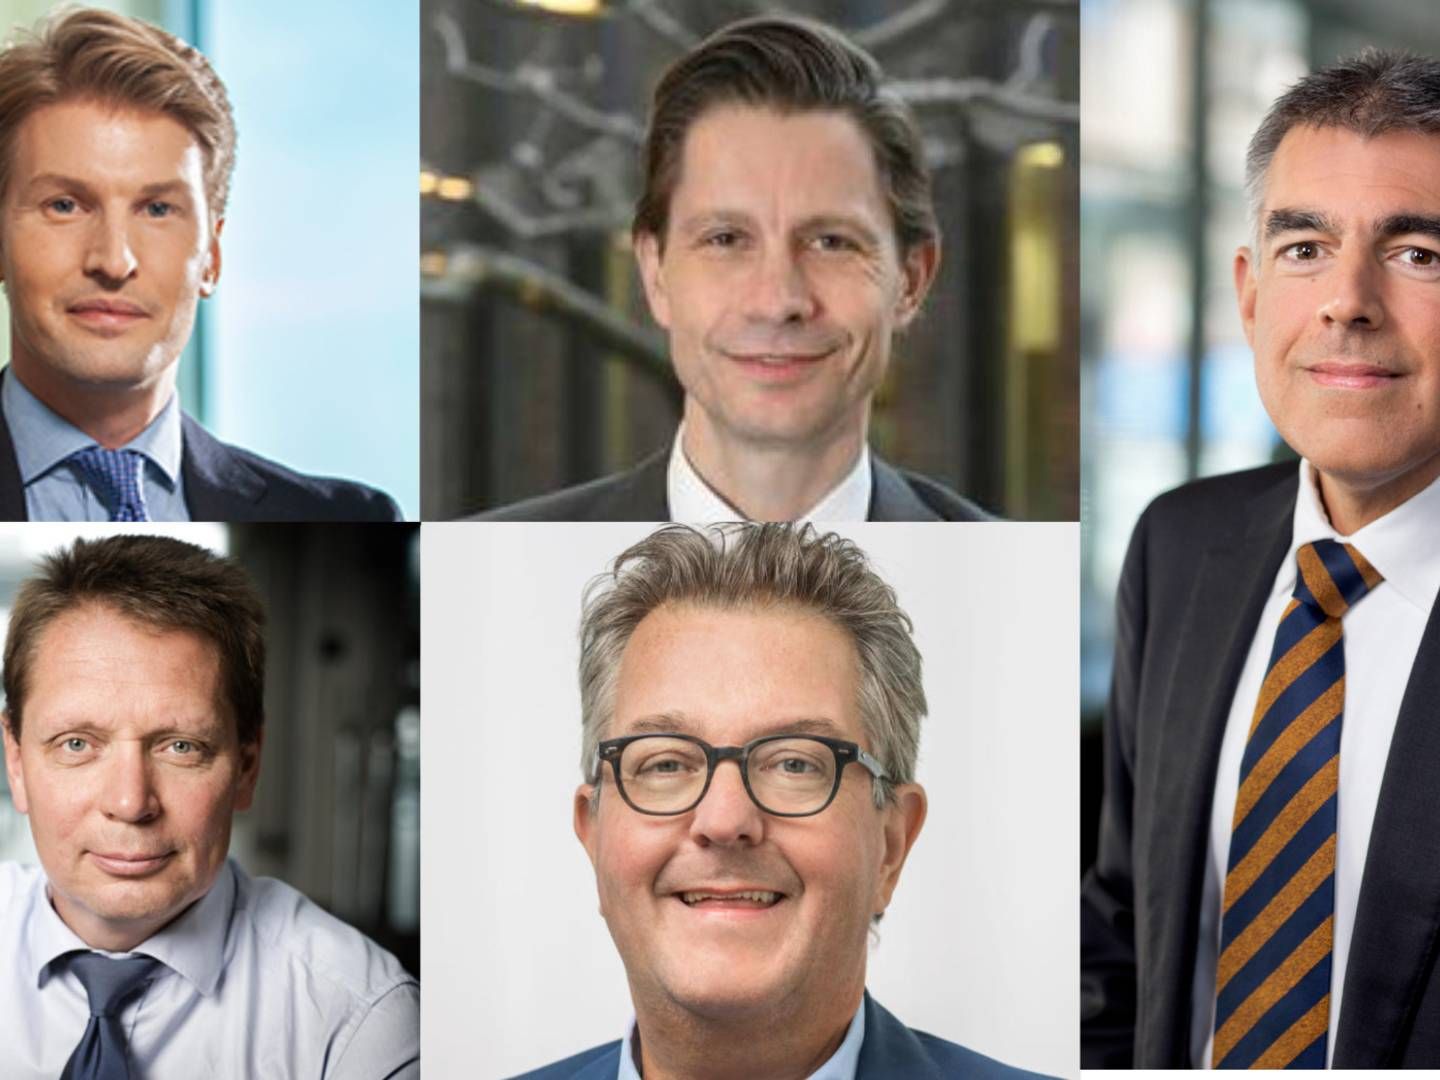 Gustaf Linnell, Head of Fixed Income at Storebrand Asset Management, Christian Heiberg, CEO at Danske Bank Asset Management, Mikko Ayub, CEO of Aktia, Henning Mortensen, head of Jyske Capital and Olof Neiglick, head of strategy and support at Swedbank Robur. | Photo: PR/Storebrand, Danske Bank, Aktia, Jyske Bank and Swedbank.